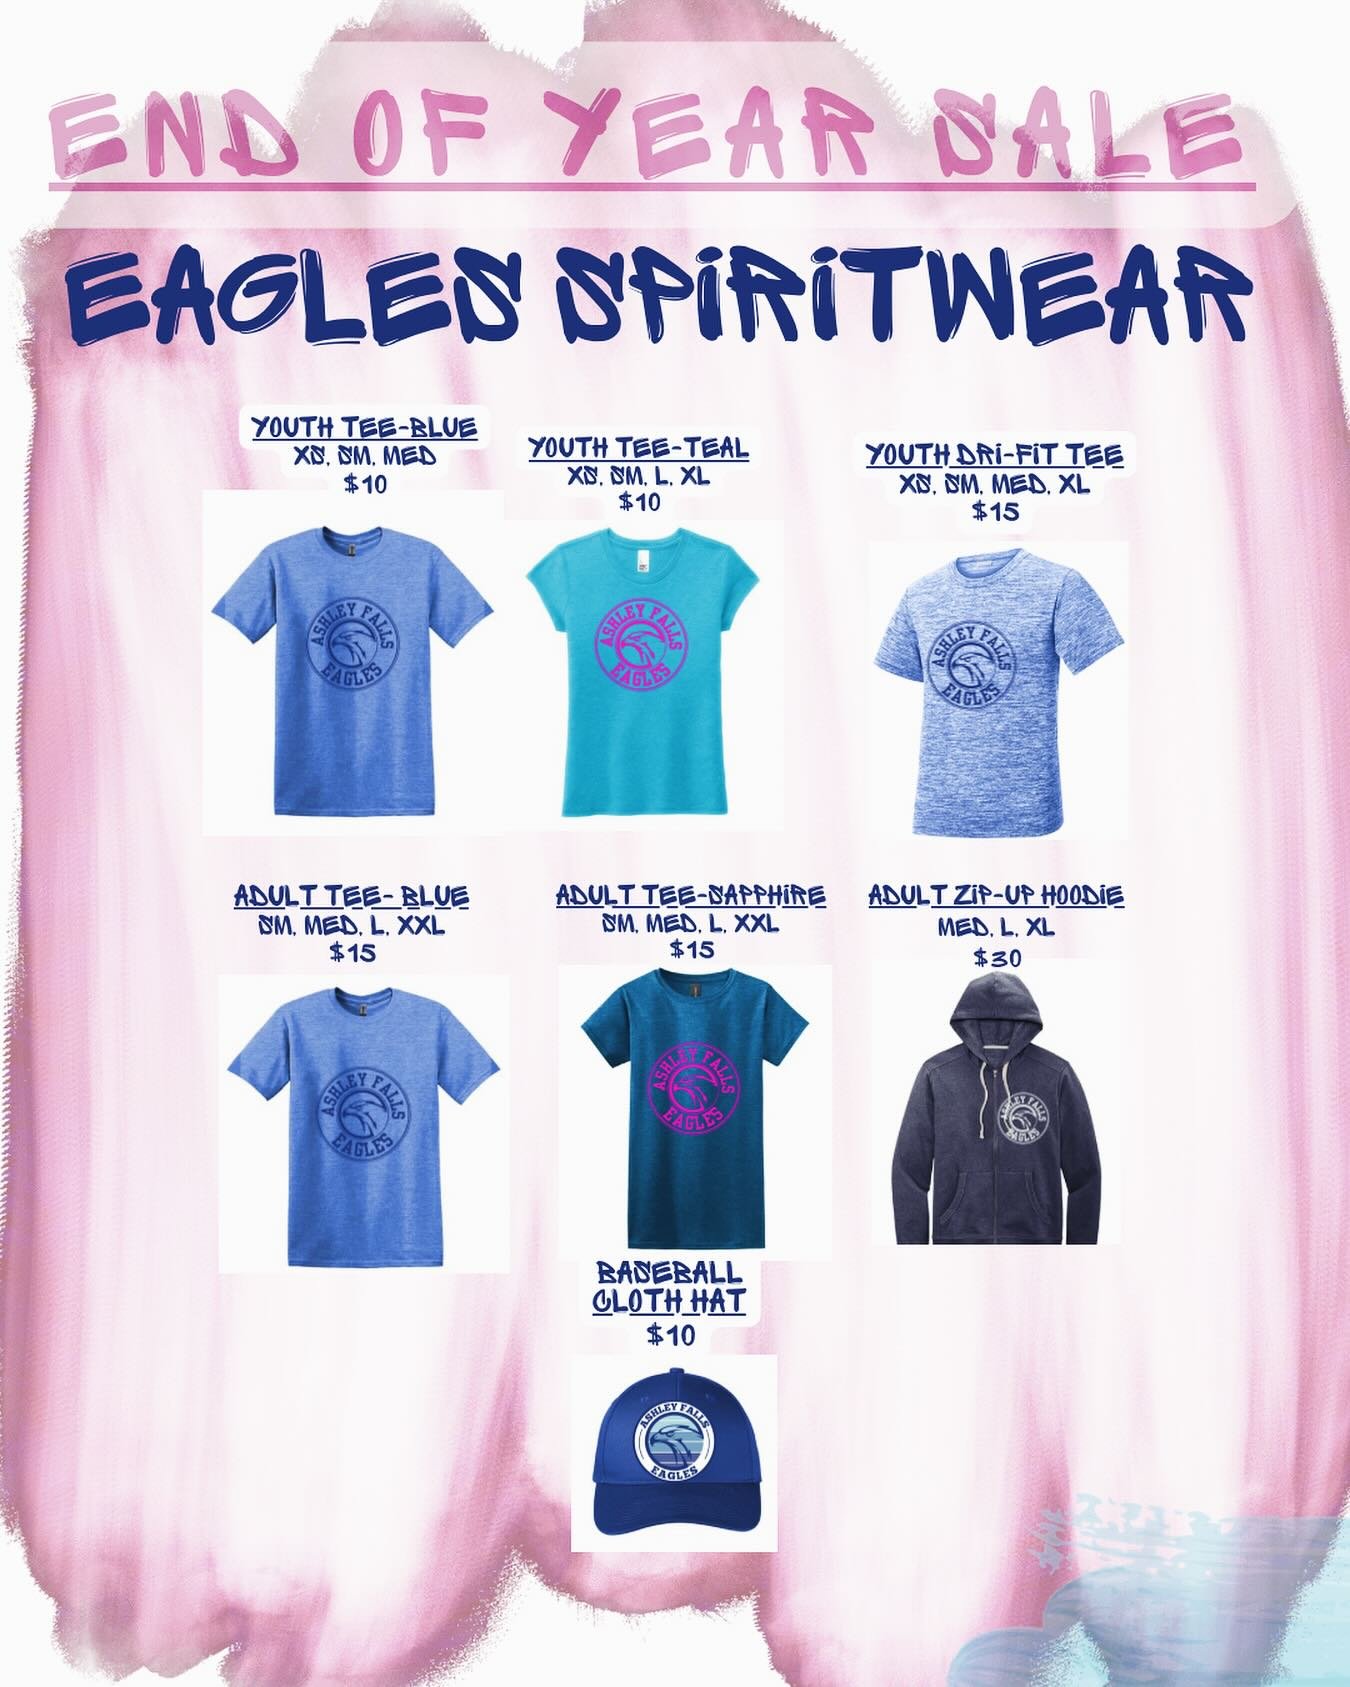 Second to last Sprit Wear Friday this week! 
Outgrown your fall purchase? Now you can purchase the right size for summertime during our end of year sale! Last chance to get your 23/24 spirit wear before it&rsquo;s all gone! Limited sizes/quantities a